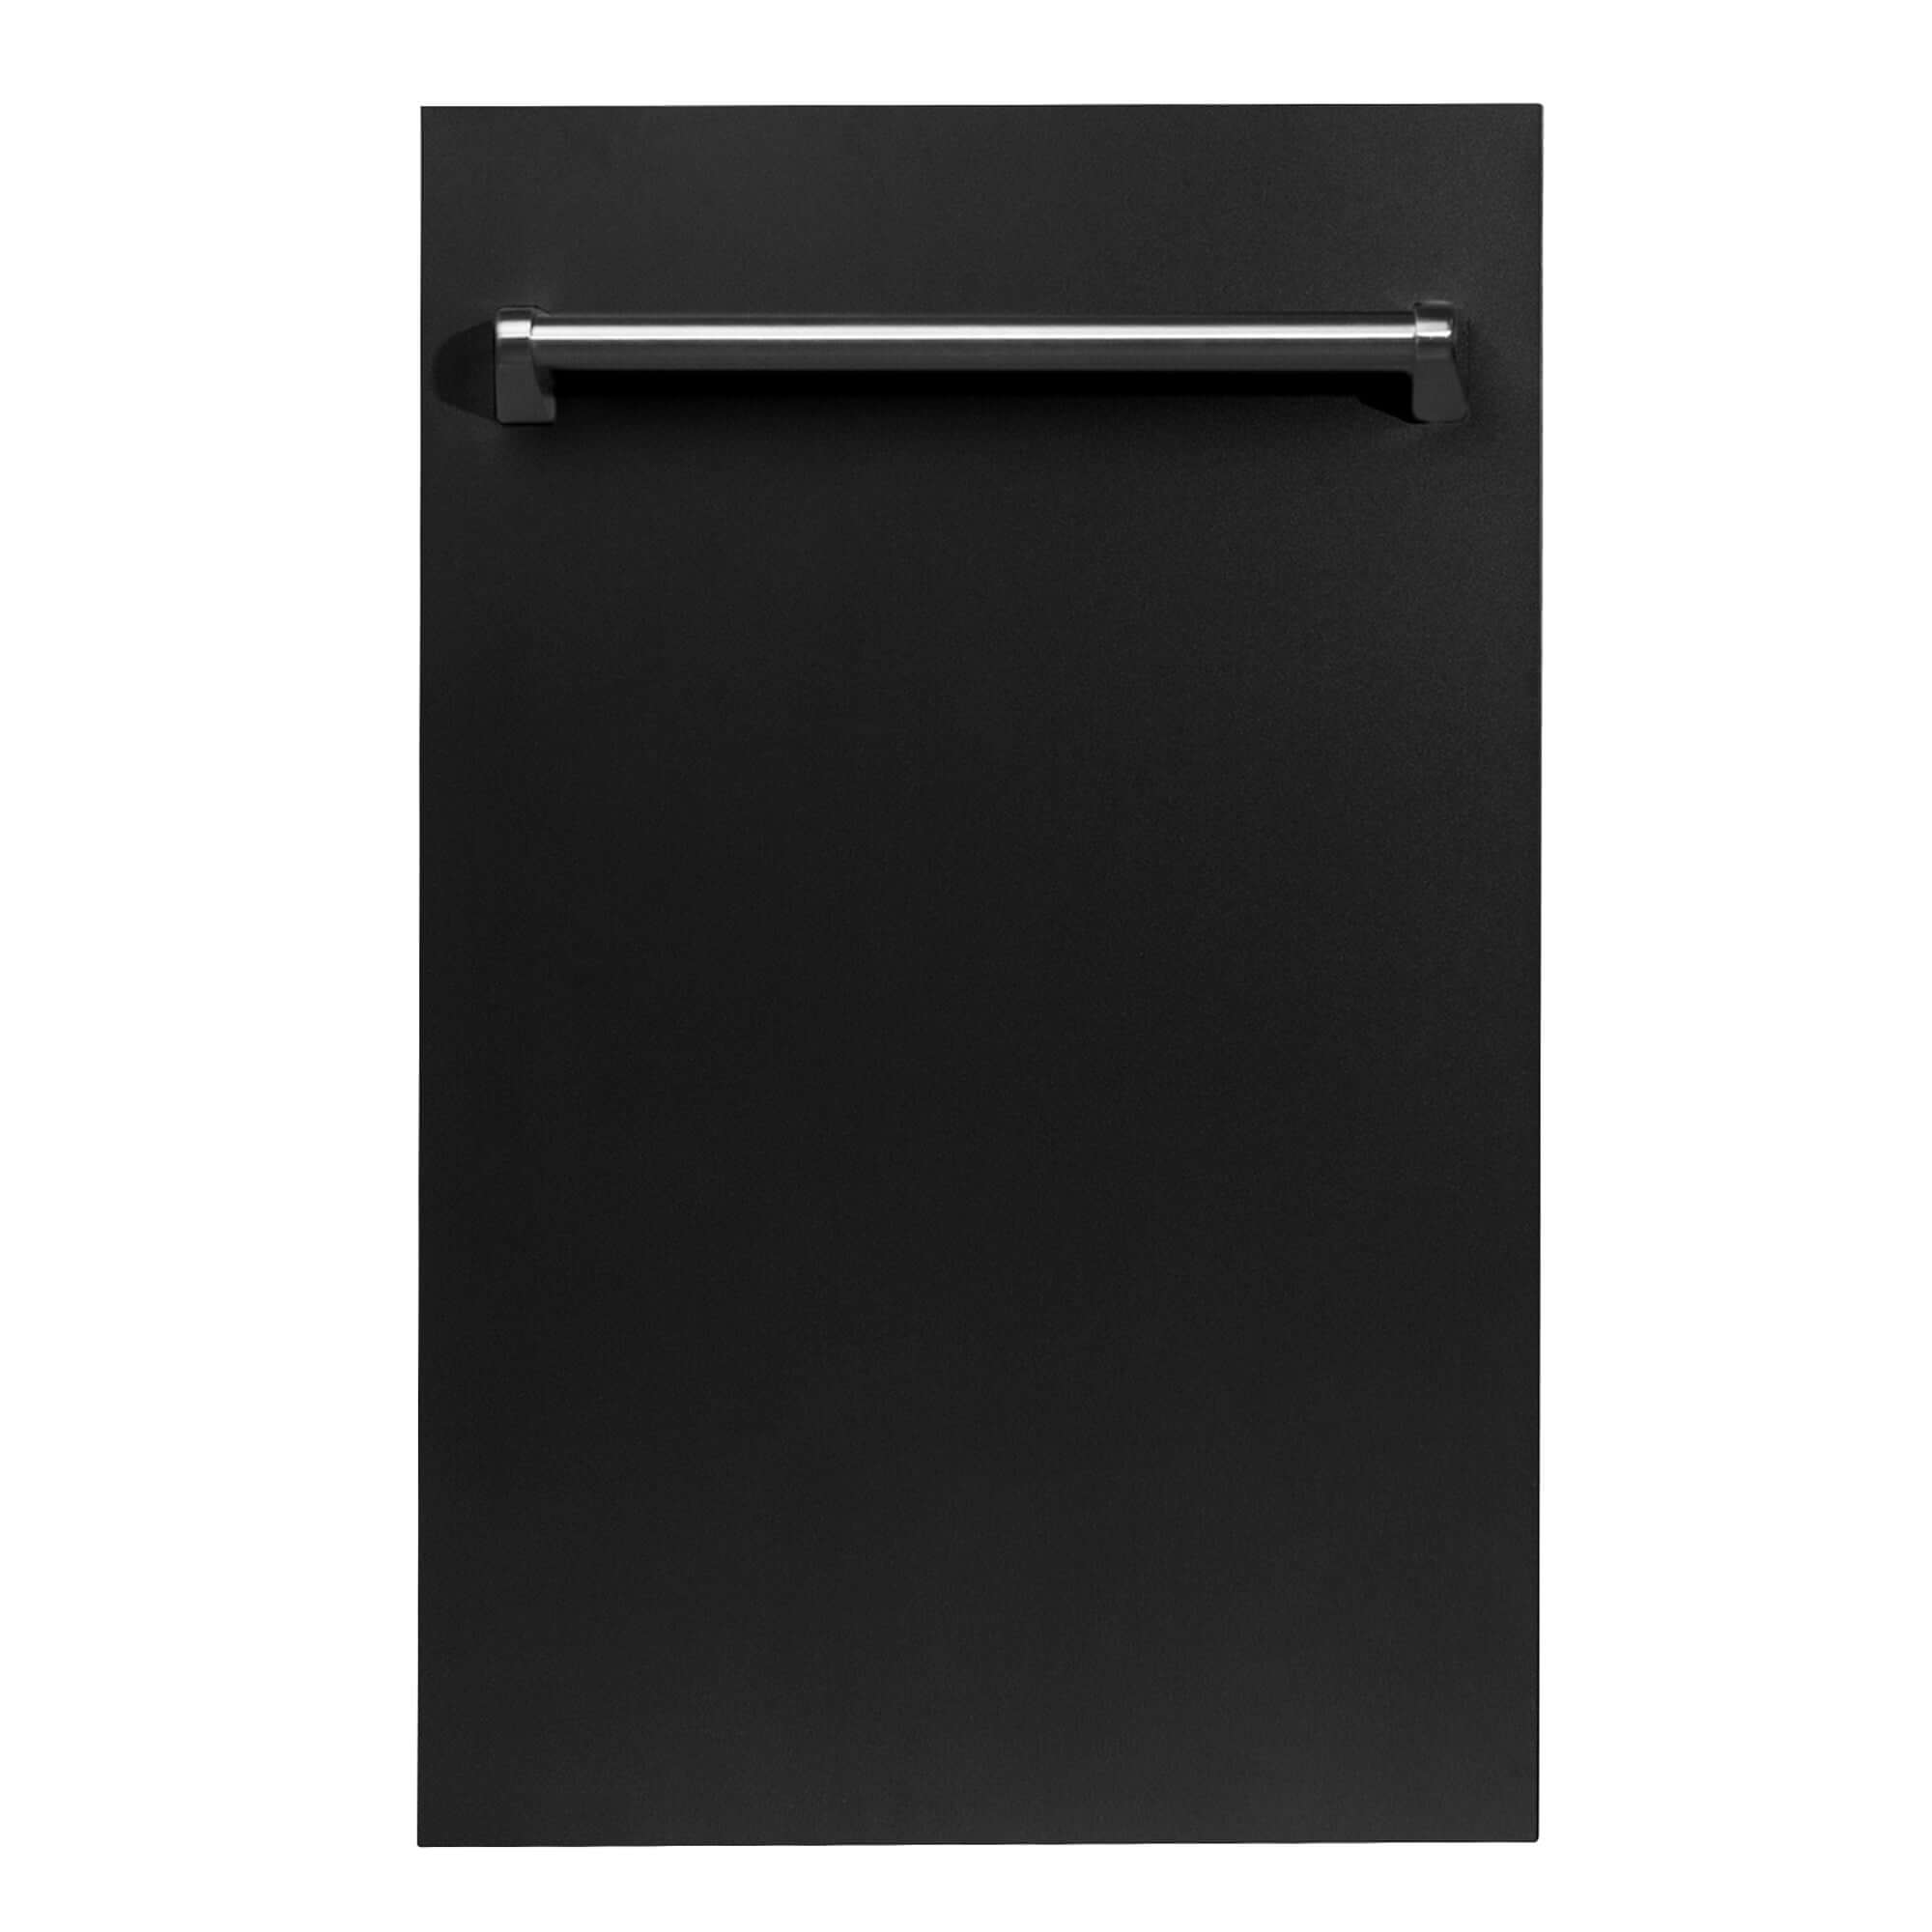 ZLINE 18 in. Compact Black Matte Top Control Built-In Dishwasher with Stainless Steel Tub and Traditional Style Handle, 52dBa (DW-BLM-18)